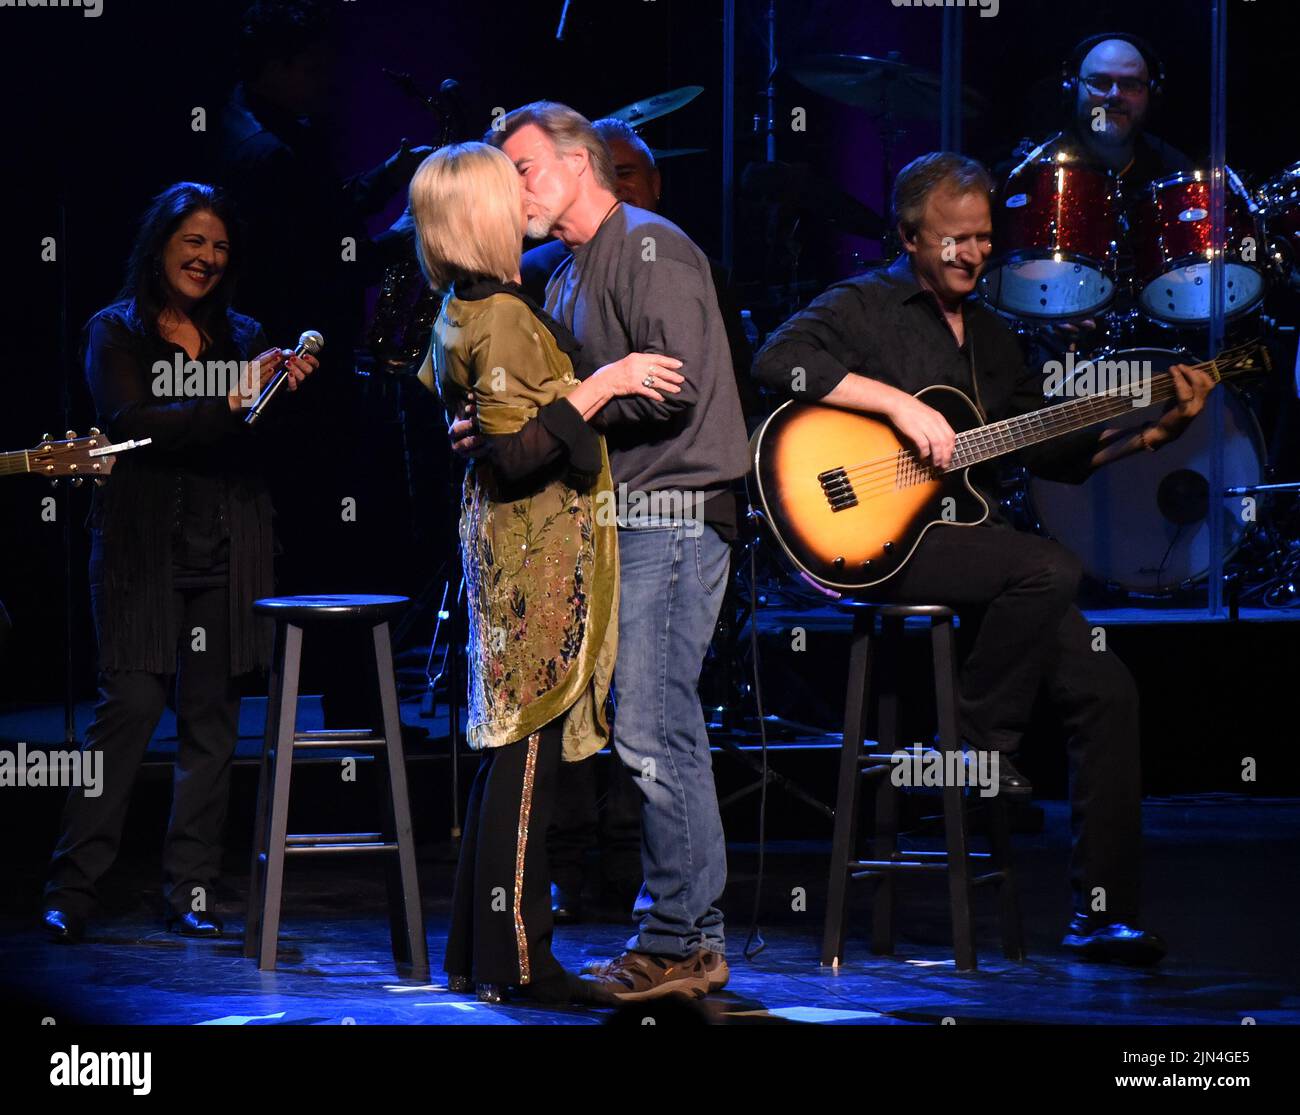 ATLANTA, GA - April 9, 2017: Olivia Newton-John surprises her husband John Easterling by singing a parody of “The Girl From Ipanema” as “The Boy From North Carolina” (in his honor) which she had sung for him at their wedding. The surprise performance took place at Cobb Energy Center in Atlanta, Georgia on April 9, 2017. CREDIT: Chris McKay / MediaPunch Stock Photo